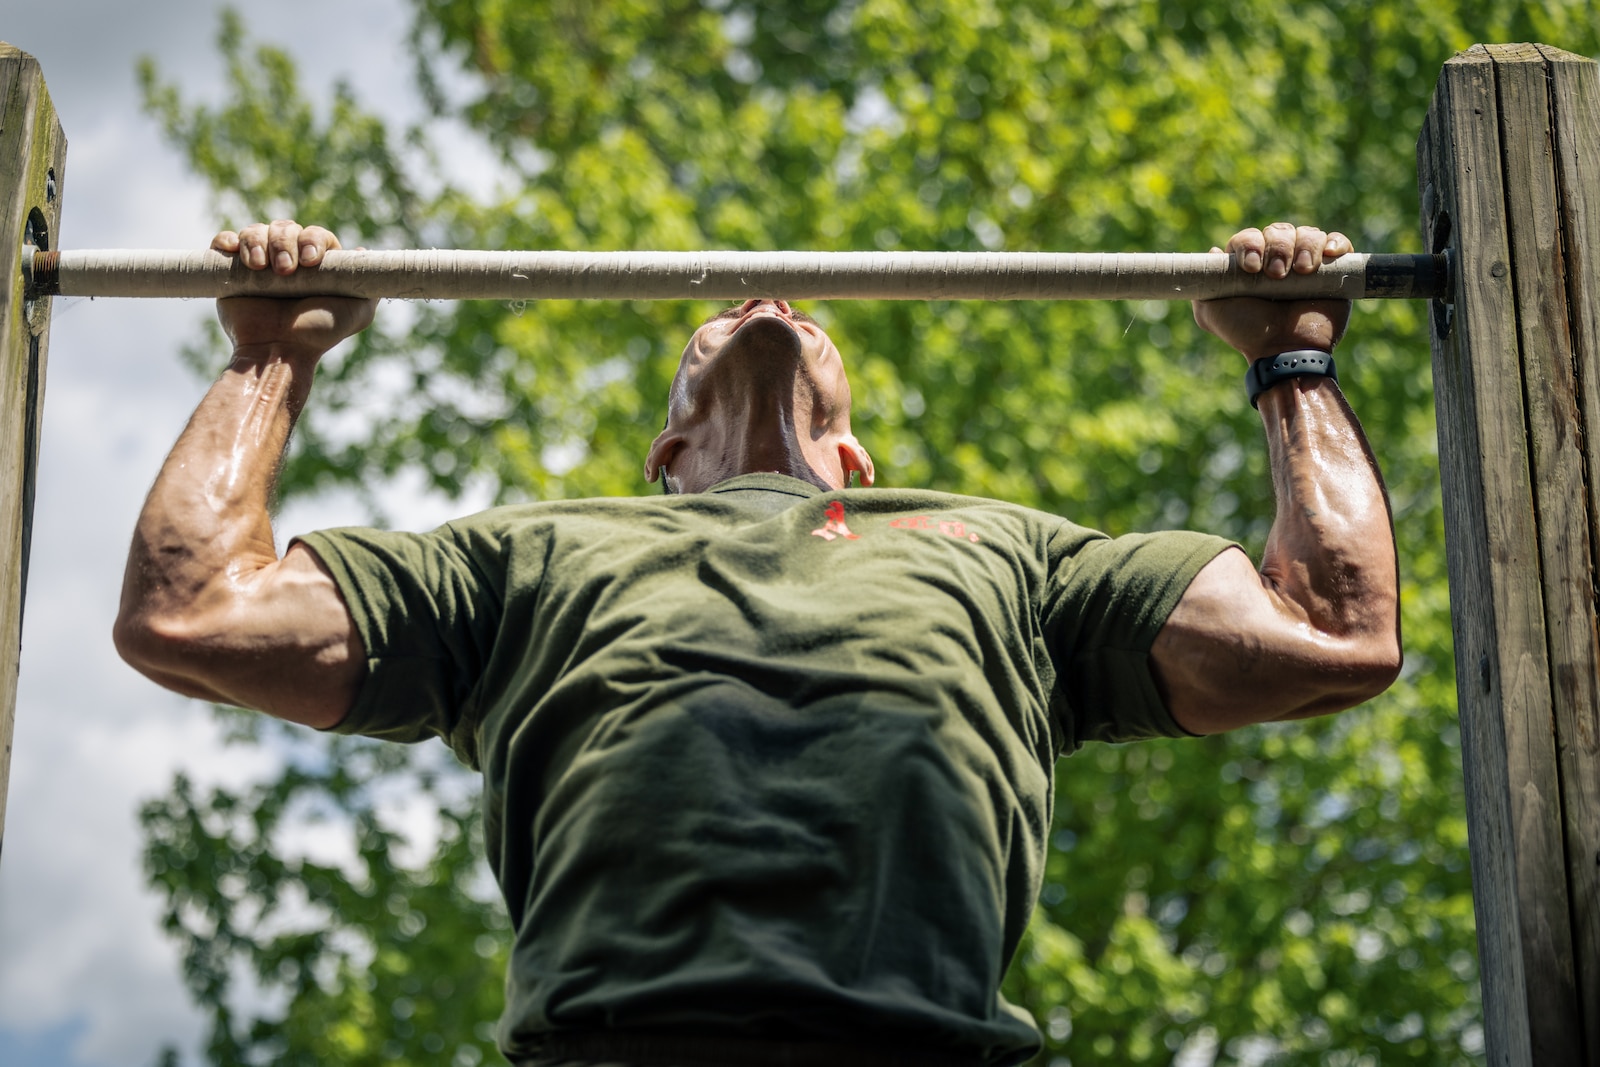 U.S. Marine Corps 1st Sgt. James Waddington, a Toledo, Ohio native and company first sergeant with Air Control Training Squadron, conducts a pull-up while competing in the Double-up competition during the 2024 Fittest Instructor Competition on Marine Corps Base Quantico, Virginia, April 24, 2024. The Fittest Instructor competition brings Marines from different units together to compete in a variety of events to include, a blind ruck march, a swimming competition, strength and endurance exercises, a Royal Marine physical fitness test, a modified biathlon, and Kim’s double obstacle course. (U.S. Marine Corps Lance Cpl. Ethan Miller)